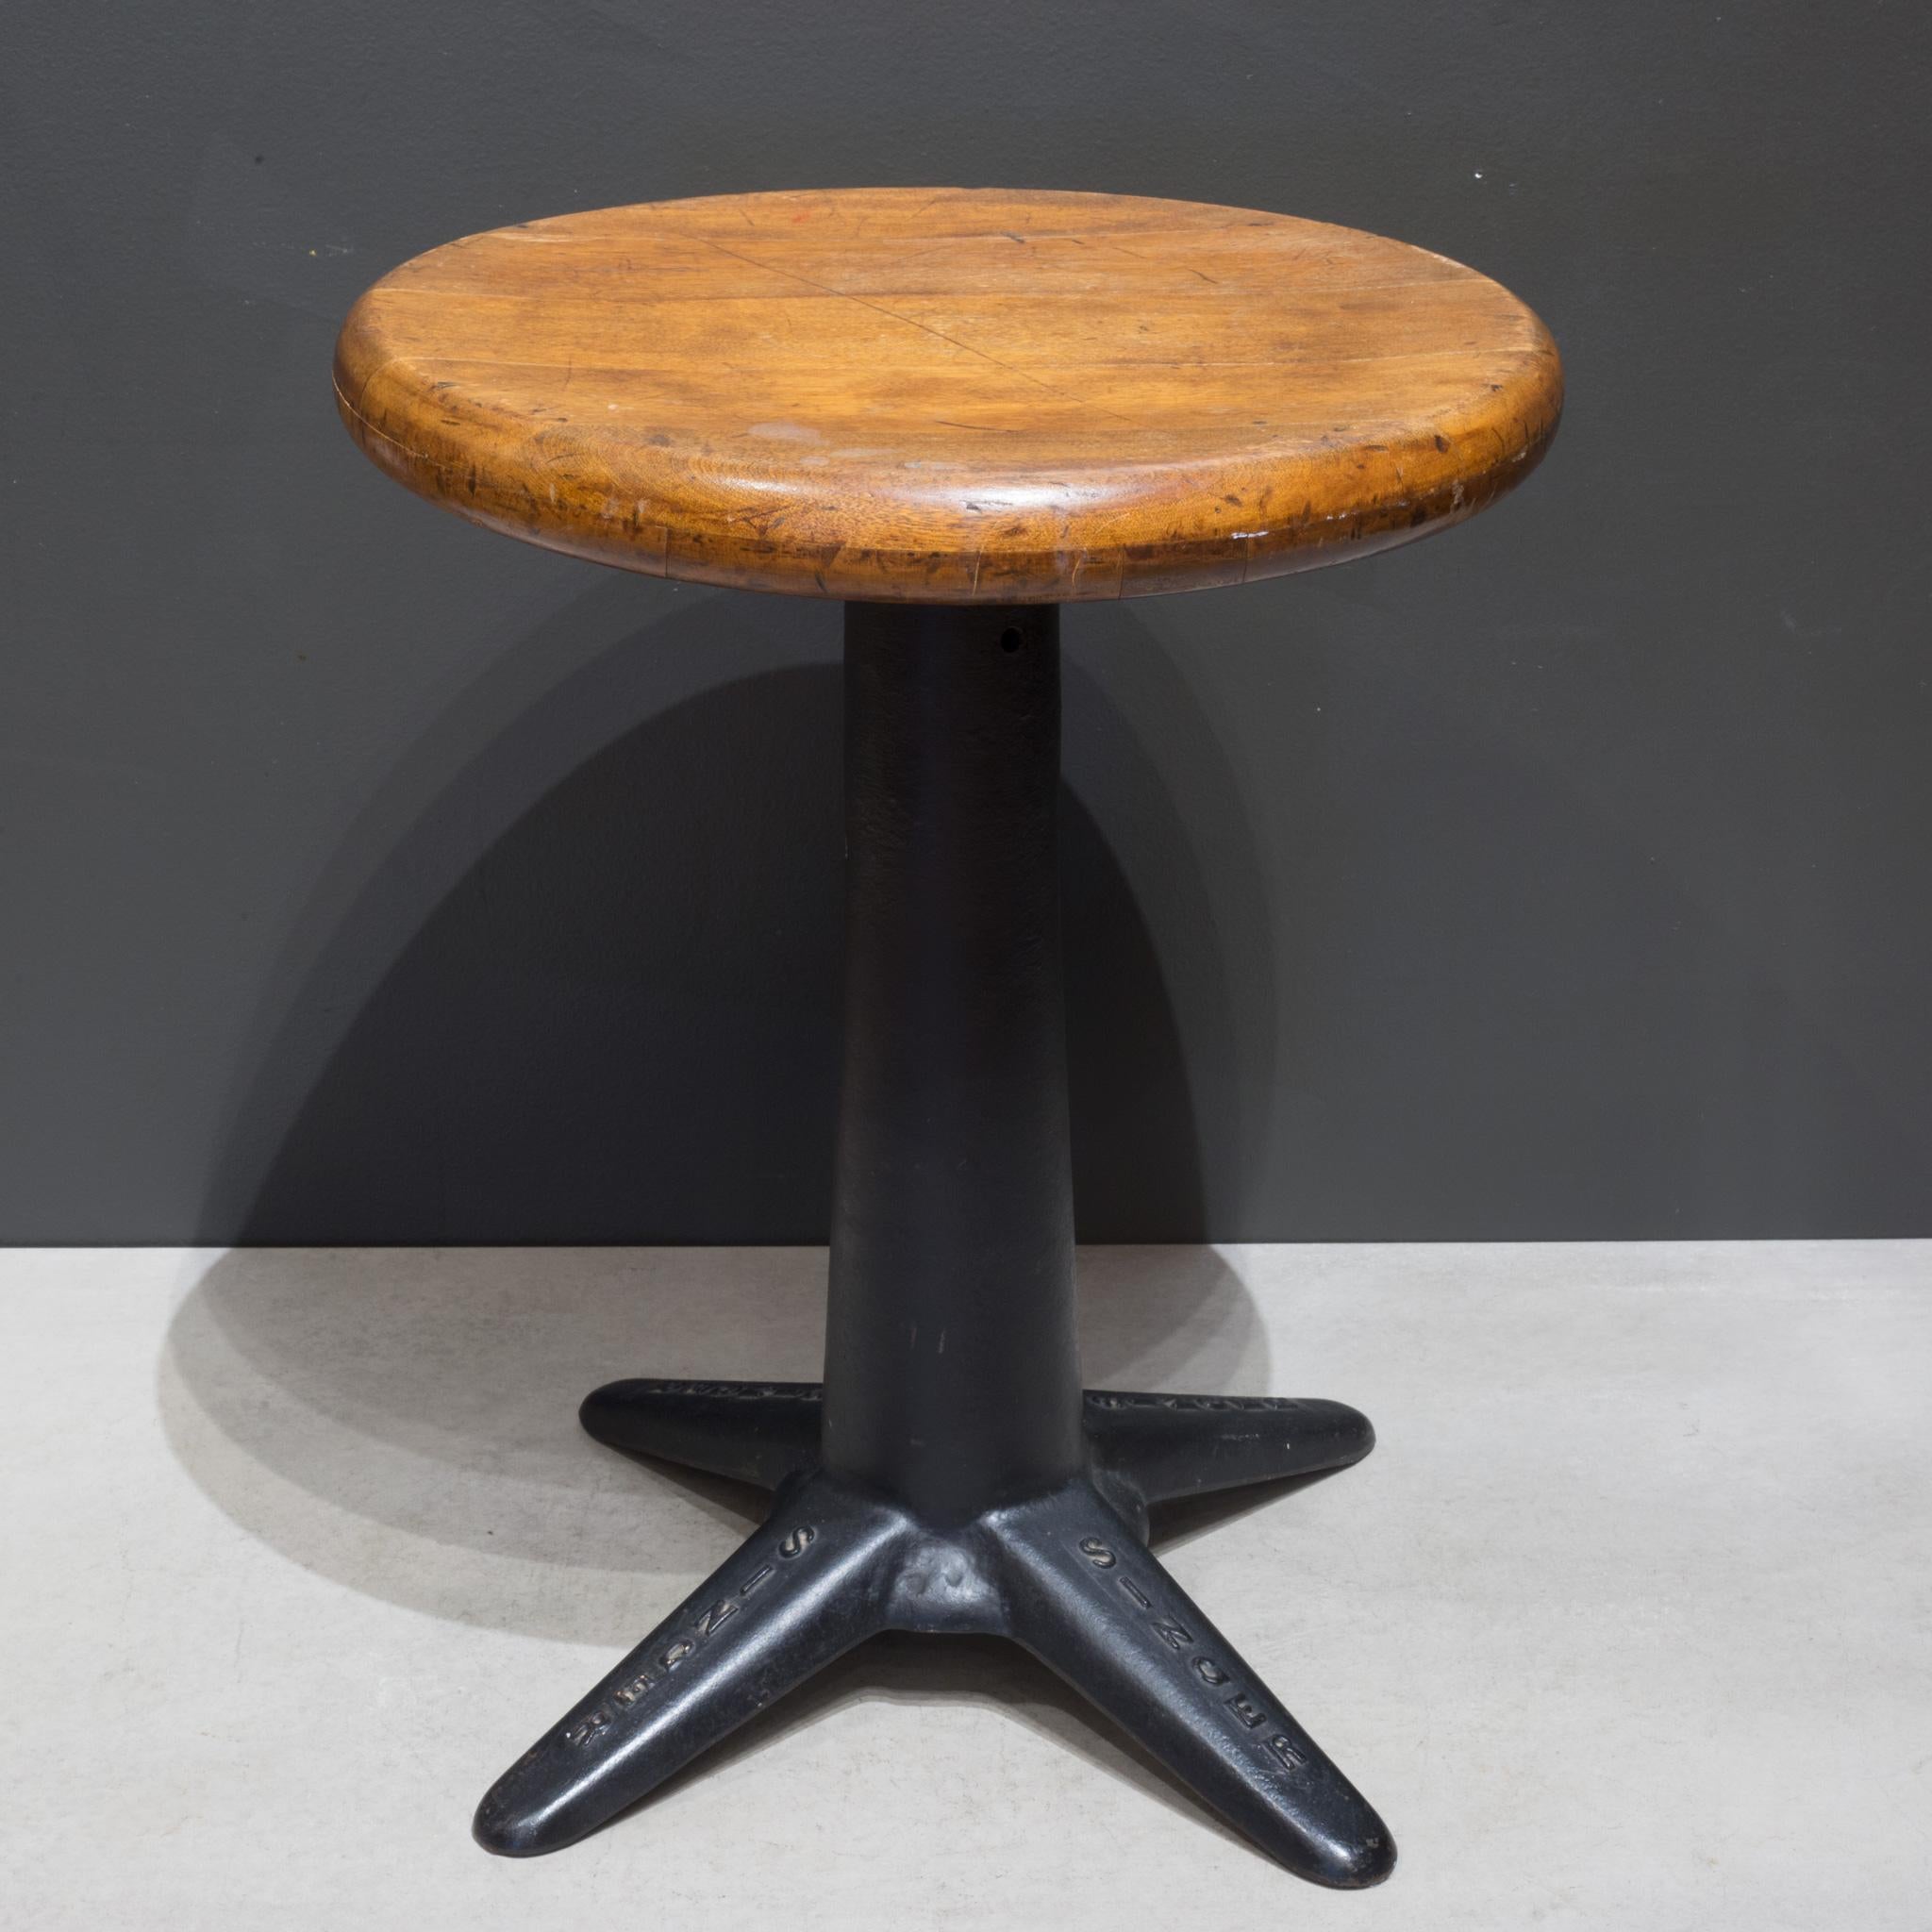 Pressed Early 20th C. Singer Sewing Machine Stool, c.1930